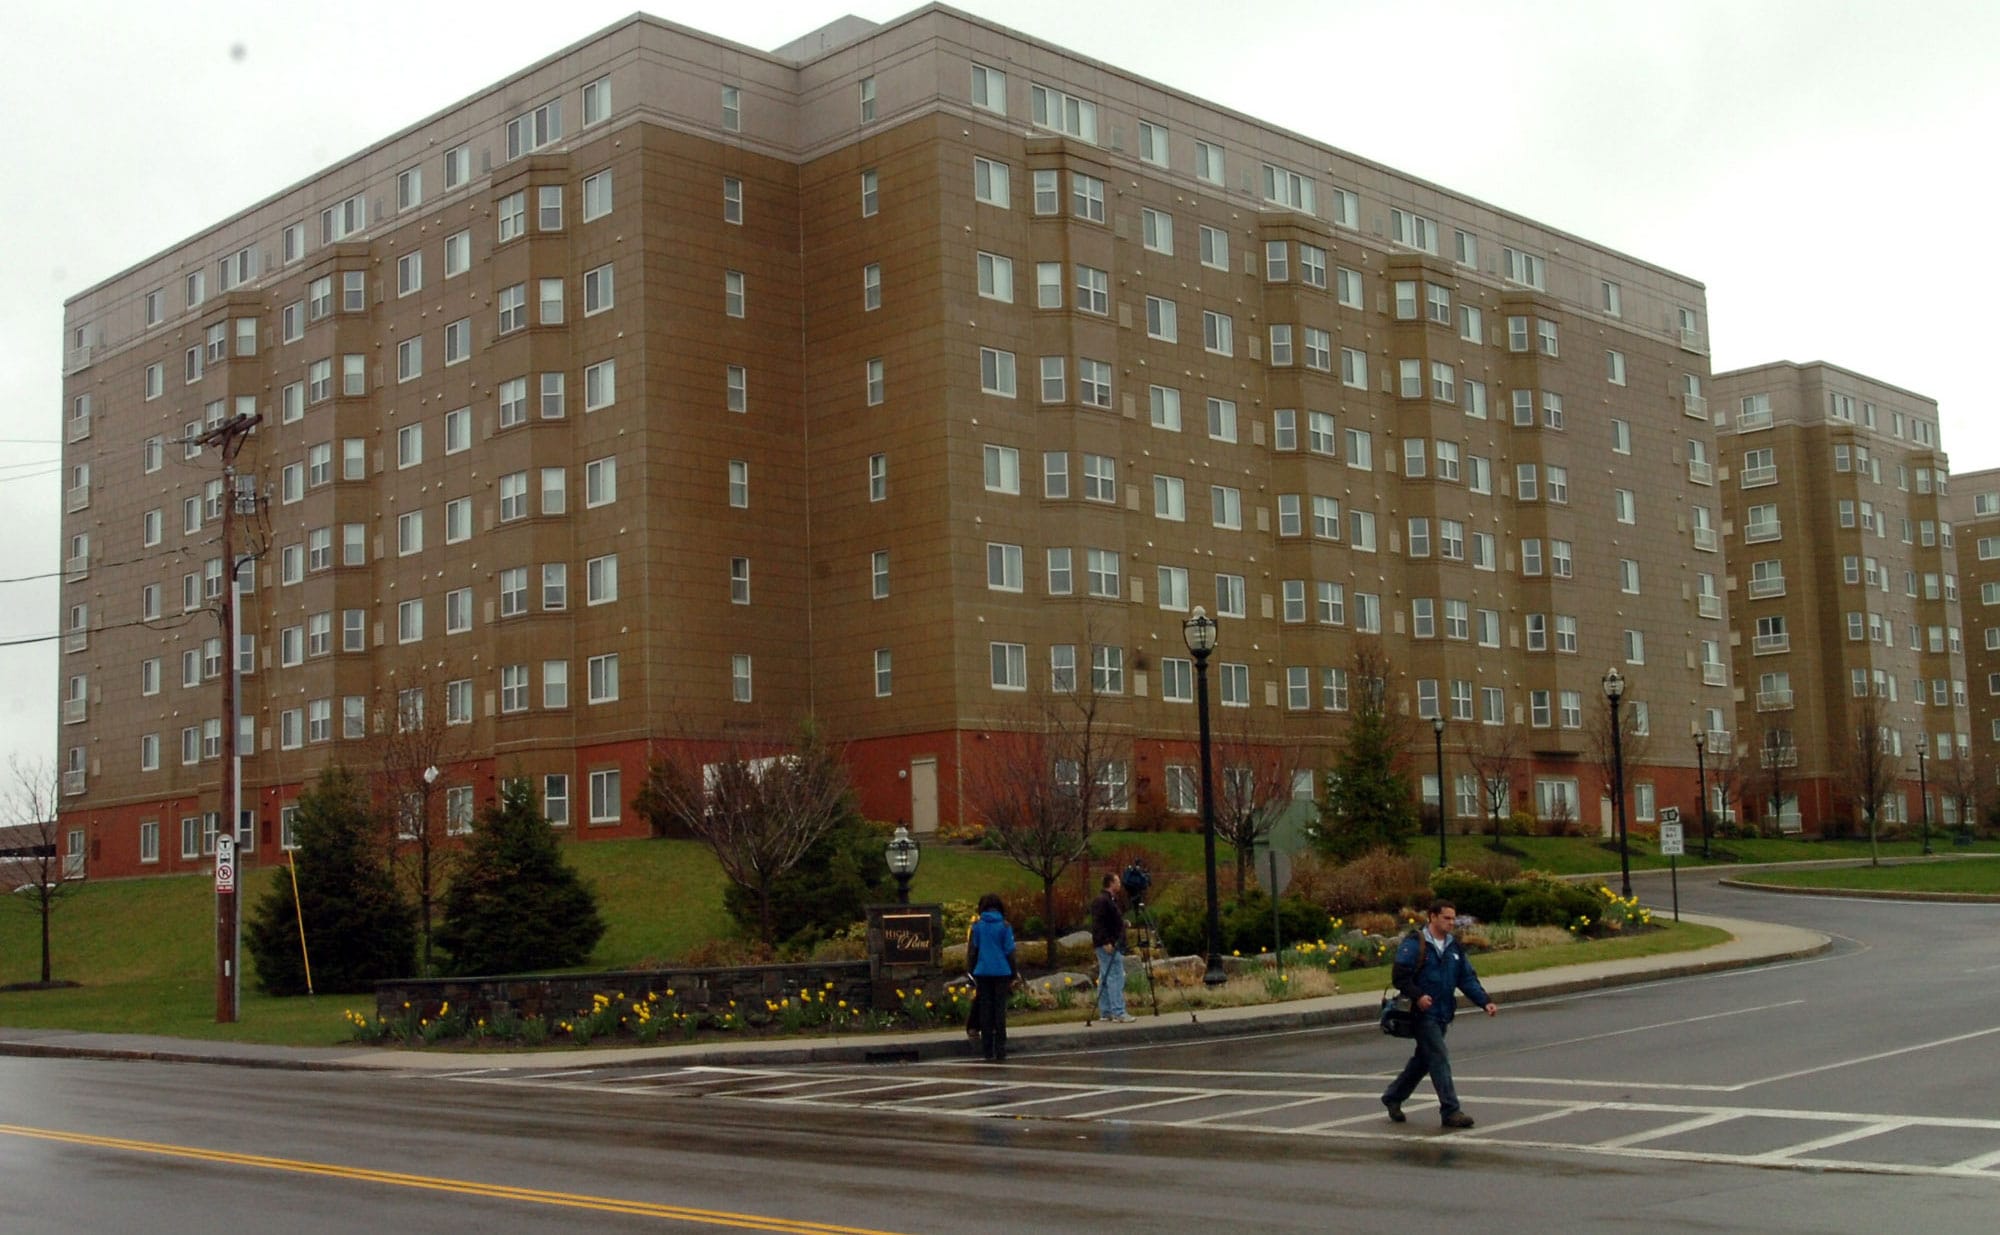 An exterior shot of the Quincy apartment complex where Philip lived.